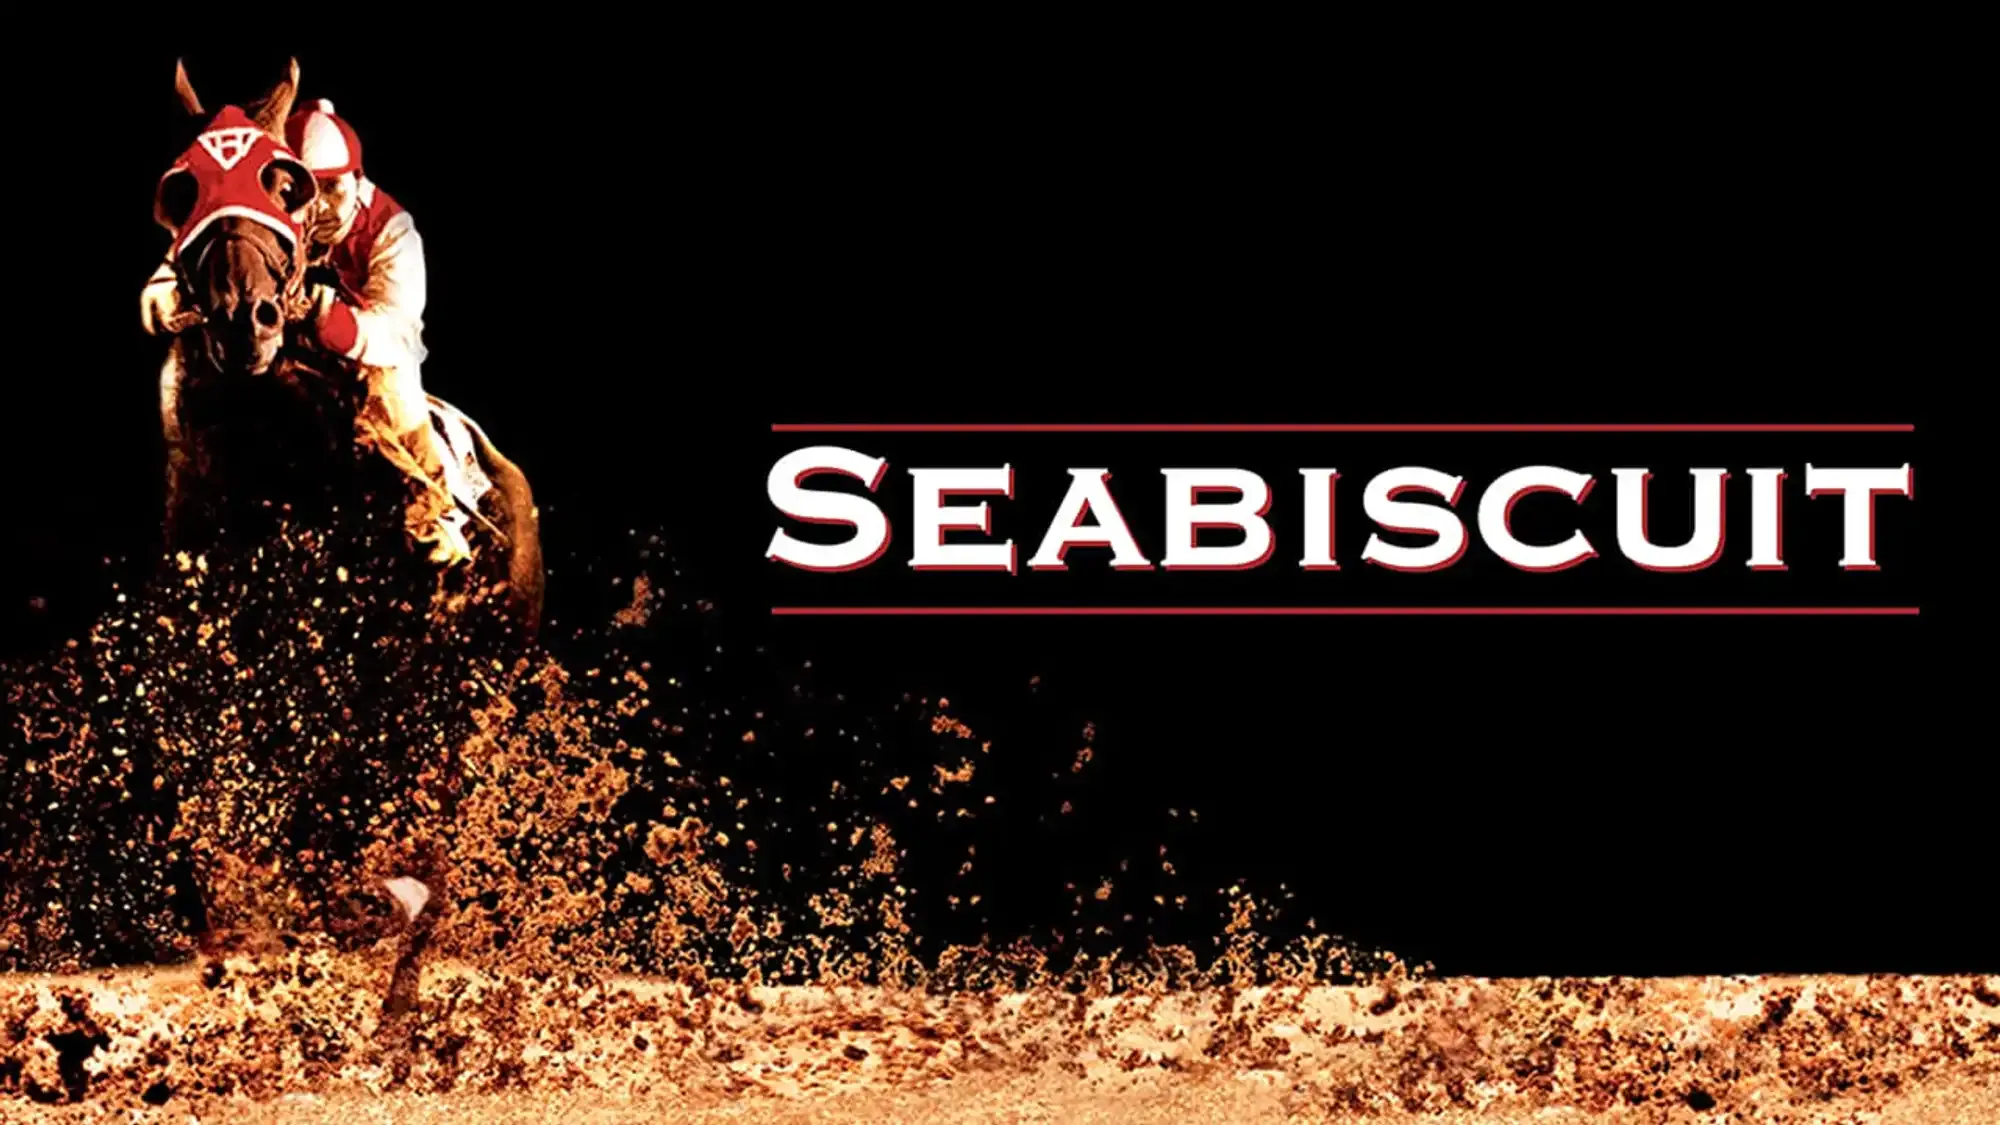 Seabiscuit movie review